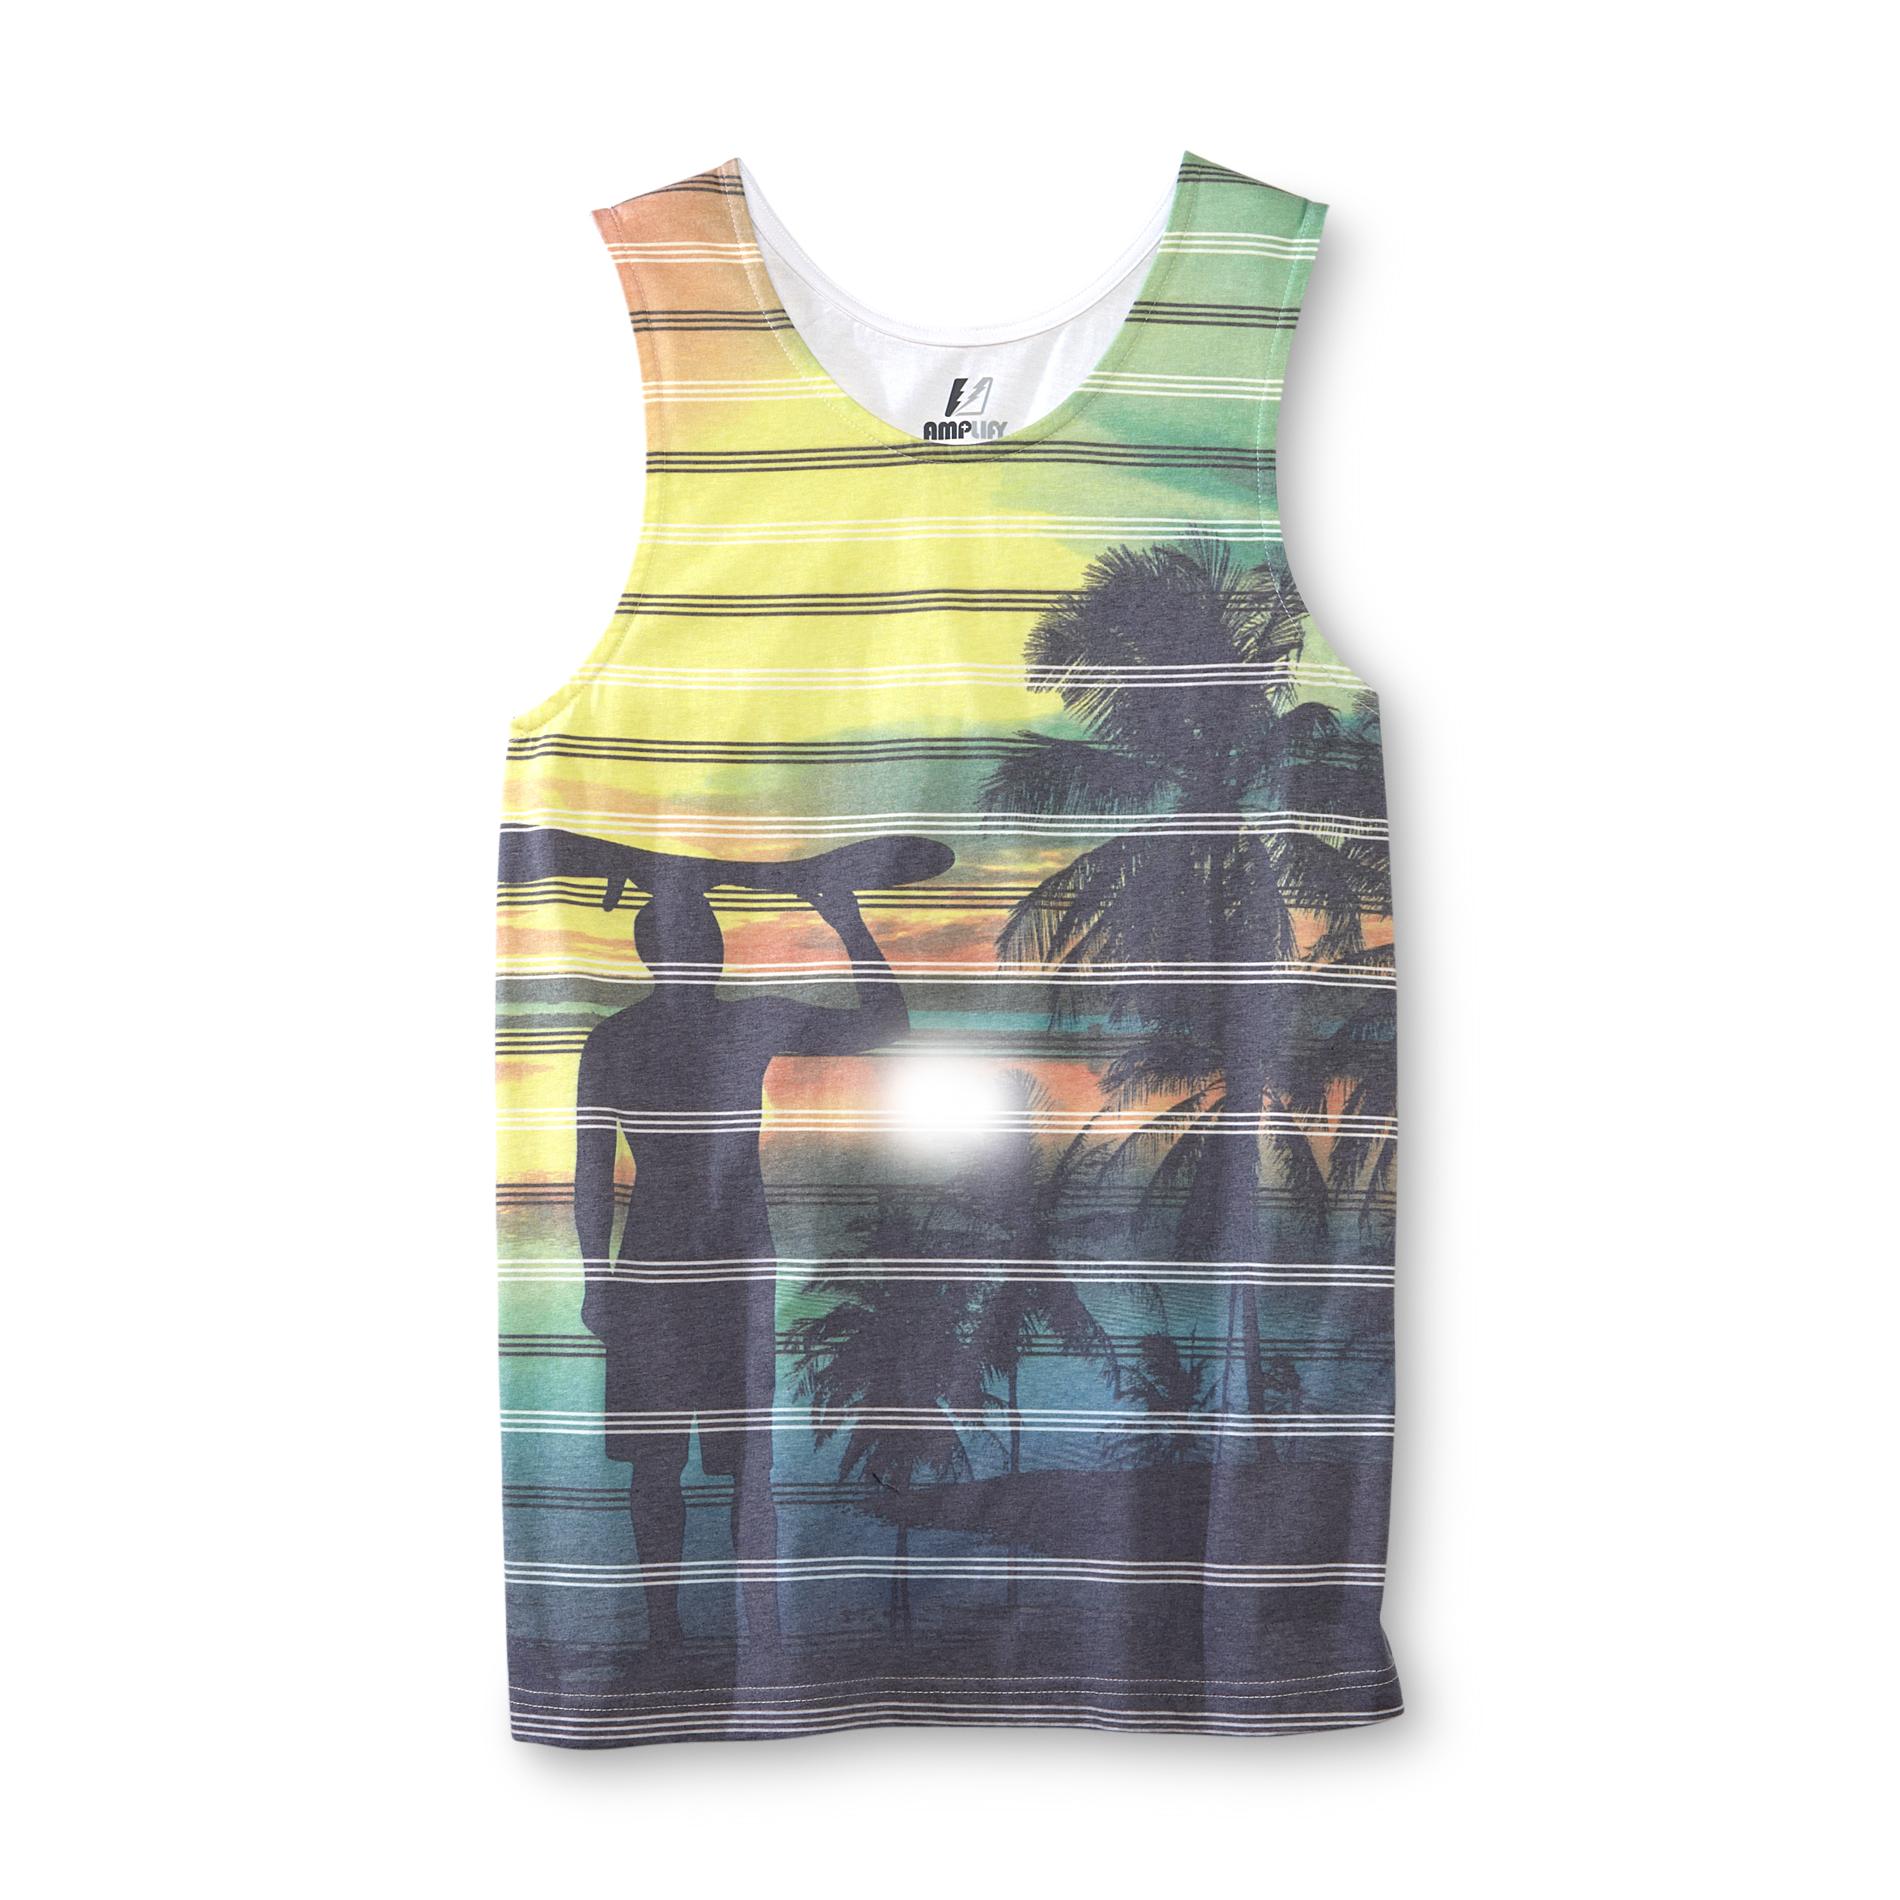 Amplify Young Men's Graphic Tank Top - Surfer